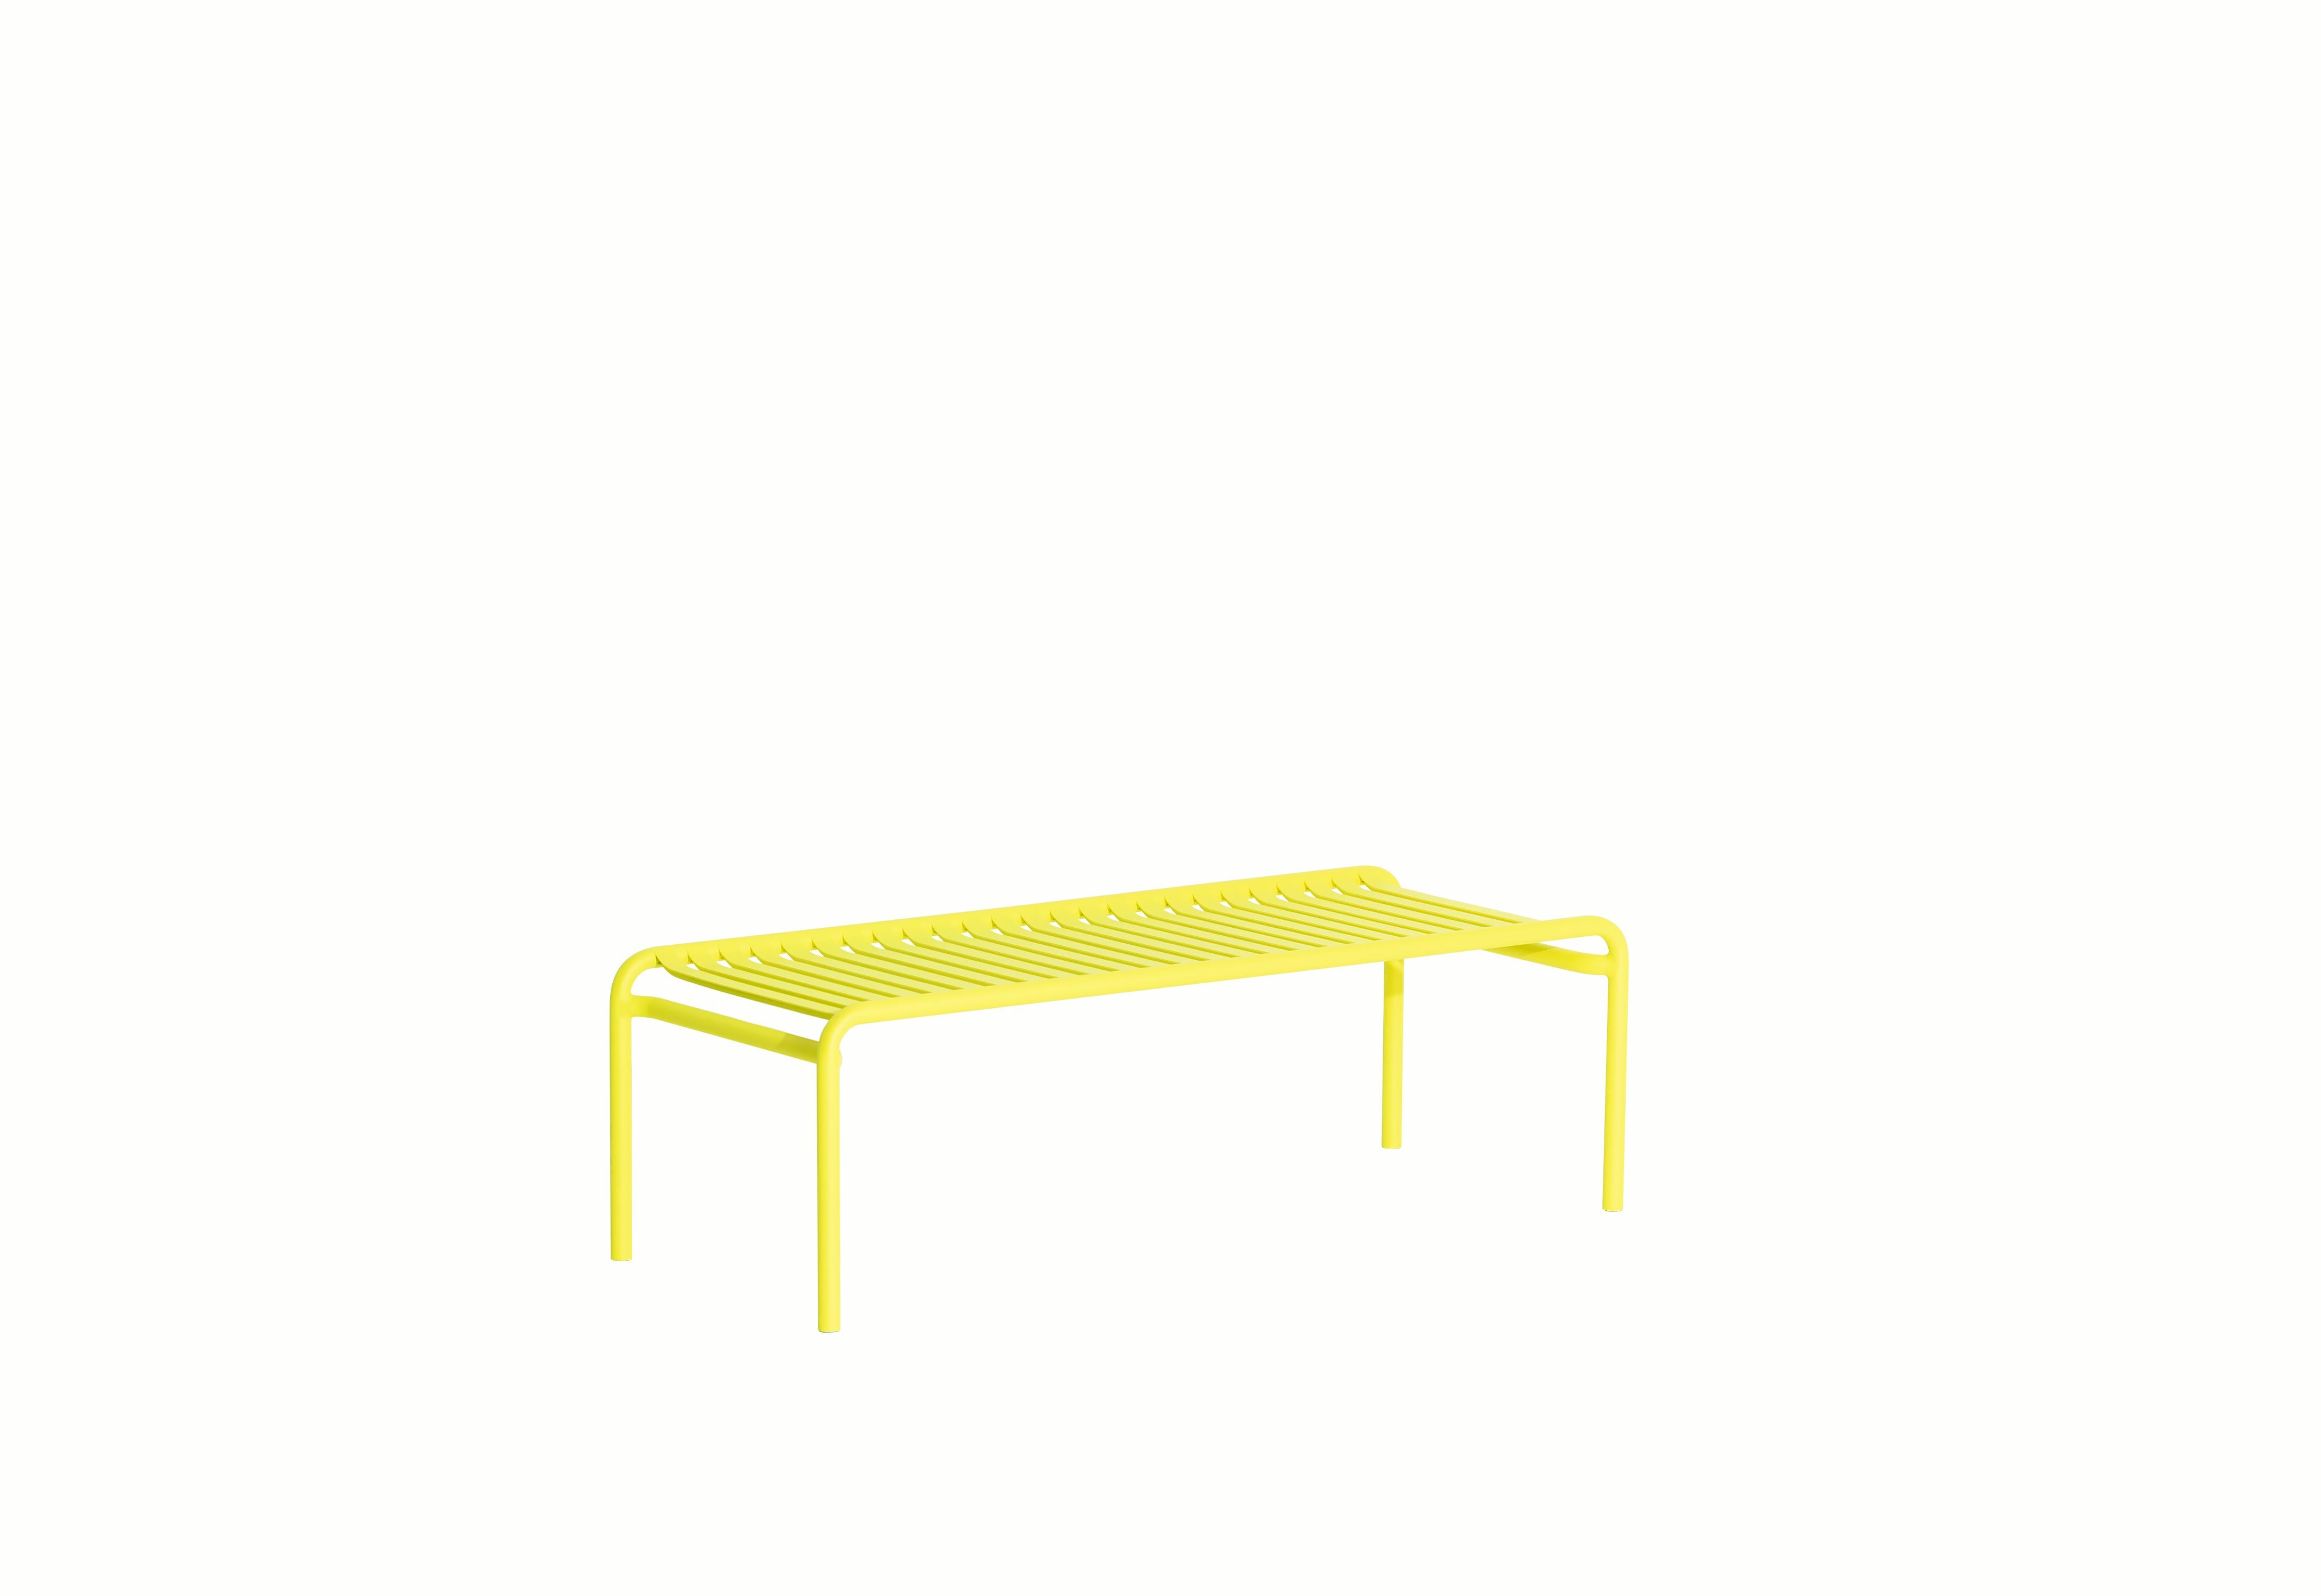 Petite Friture Week-End Long Coffee Table in Yellow Aluminium by Studio BrichetZiegler, 2017

The week-end collection is a full range of outdoor furniture, in aluminium grained epoxy paint, matt finish, that includes 18 functions and 8 colours for